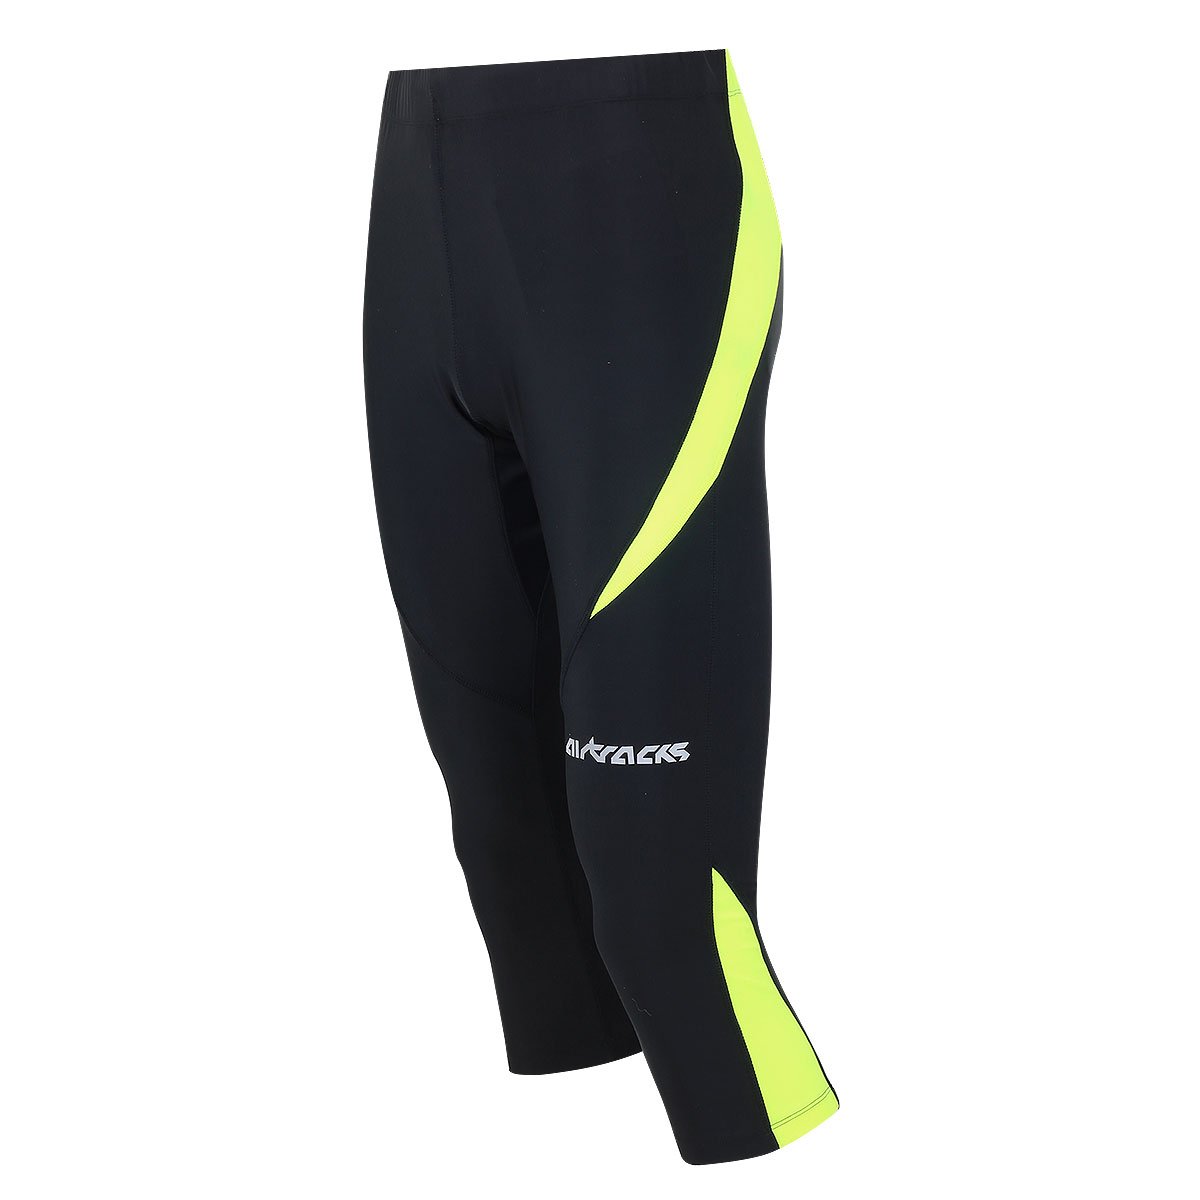 Airtracks FUNKTIONS Laufhose 3/4 LANG PRO/Running Hose – Tight/Kompression -schwarz-neon S